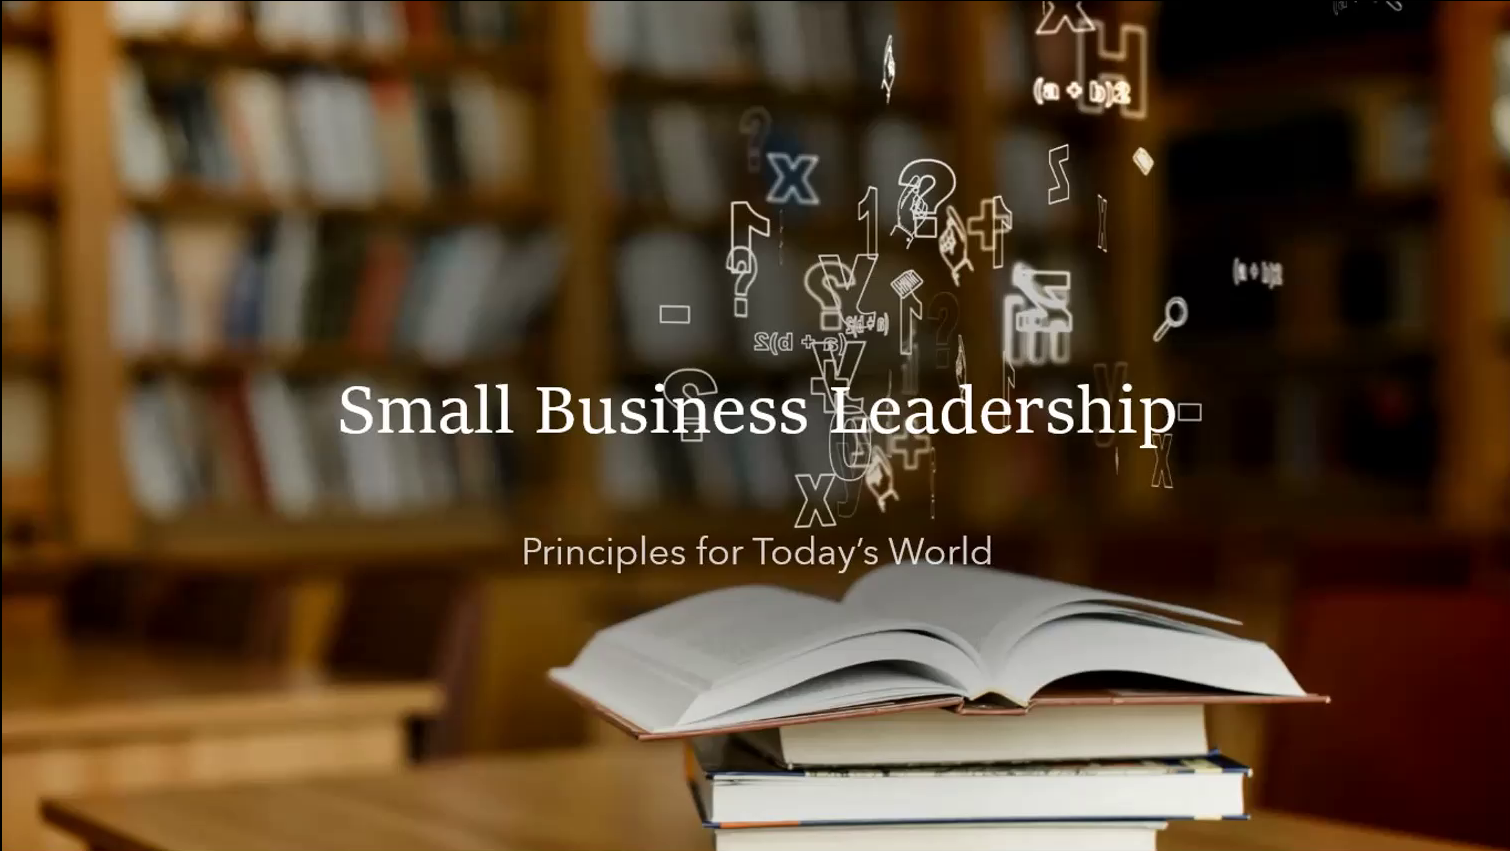 Small Business Leadership: Principles for Today’s World